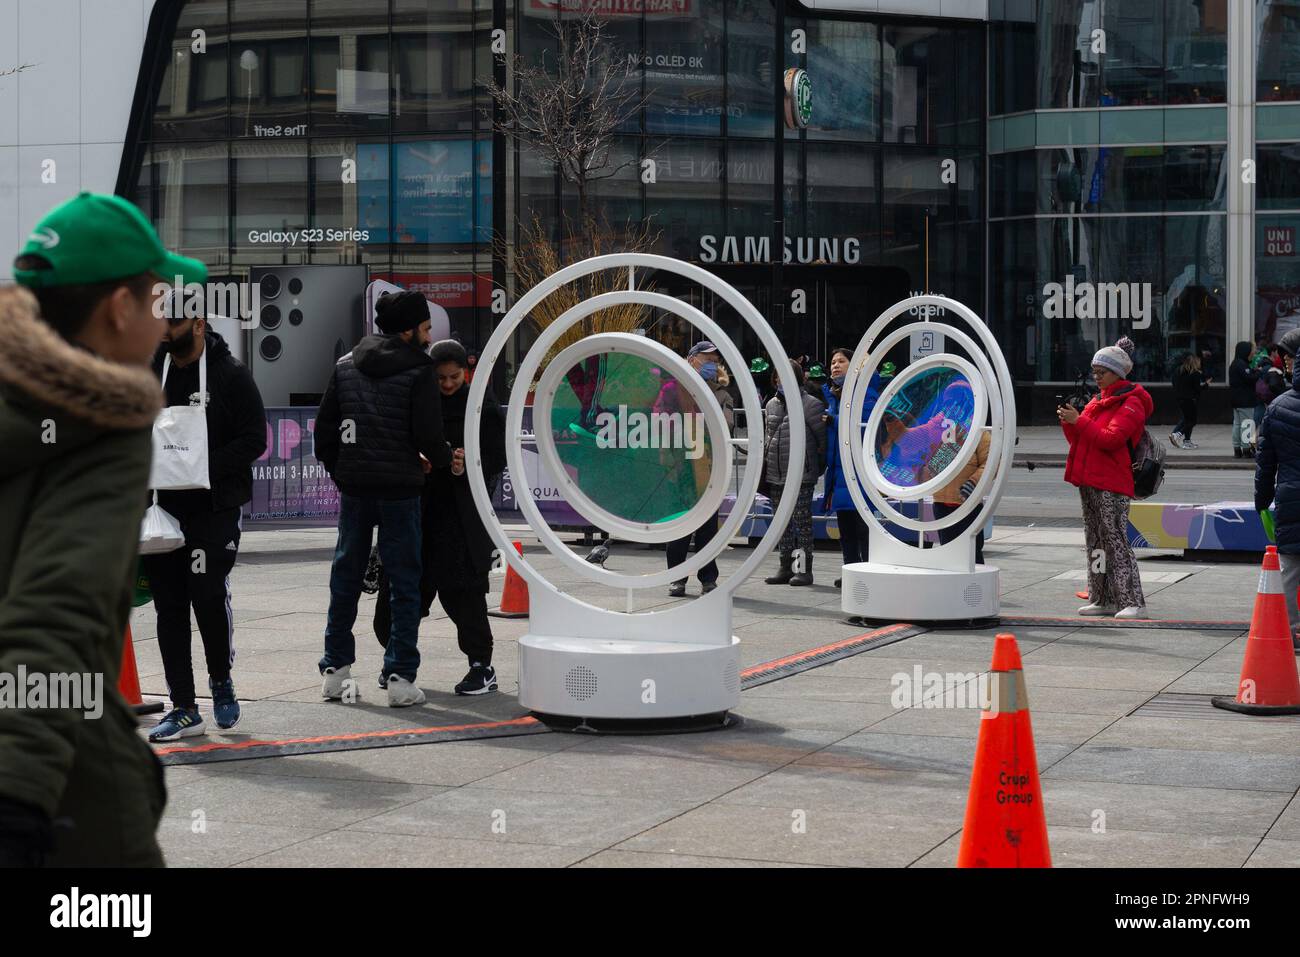 Toronto, ON, Canada - March 19, 2023: People viewing the Optik interactive installation in Downtown Toronto. Optik is inuque platform for users to man Stock Photo